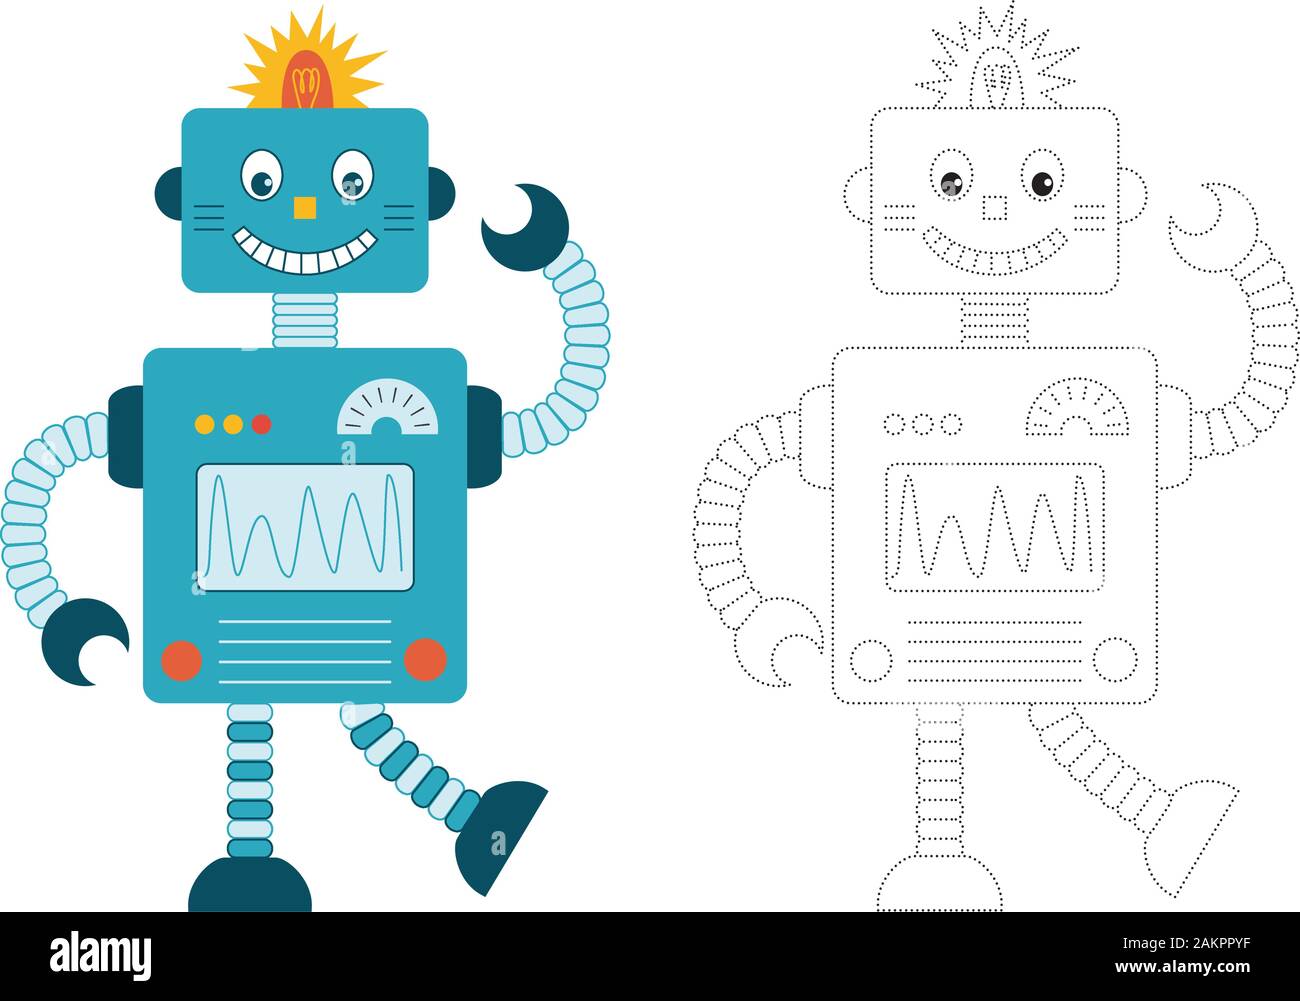 Robot and connect the dots picture. For children of preschool age. Stock Vector